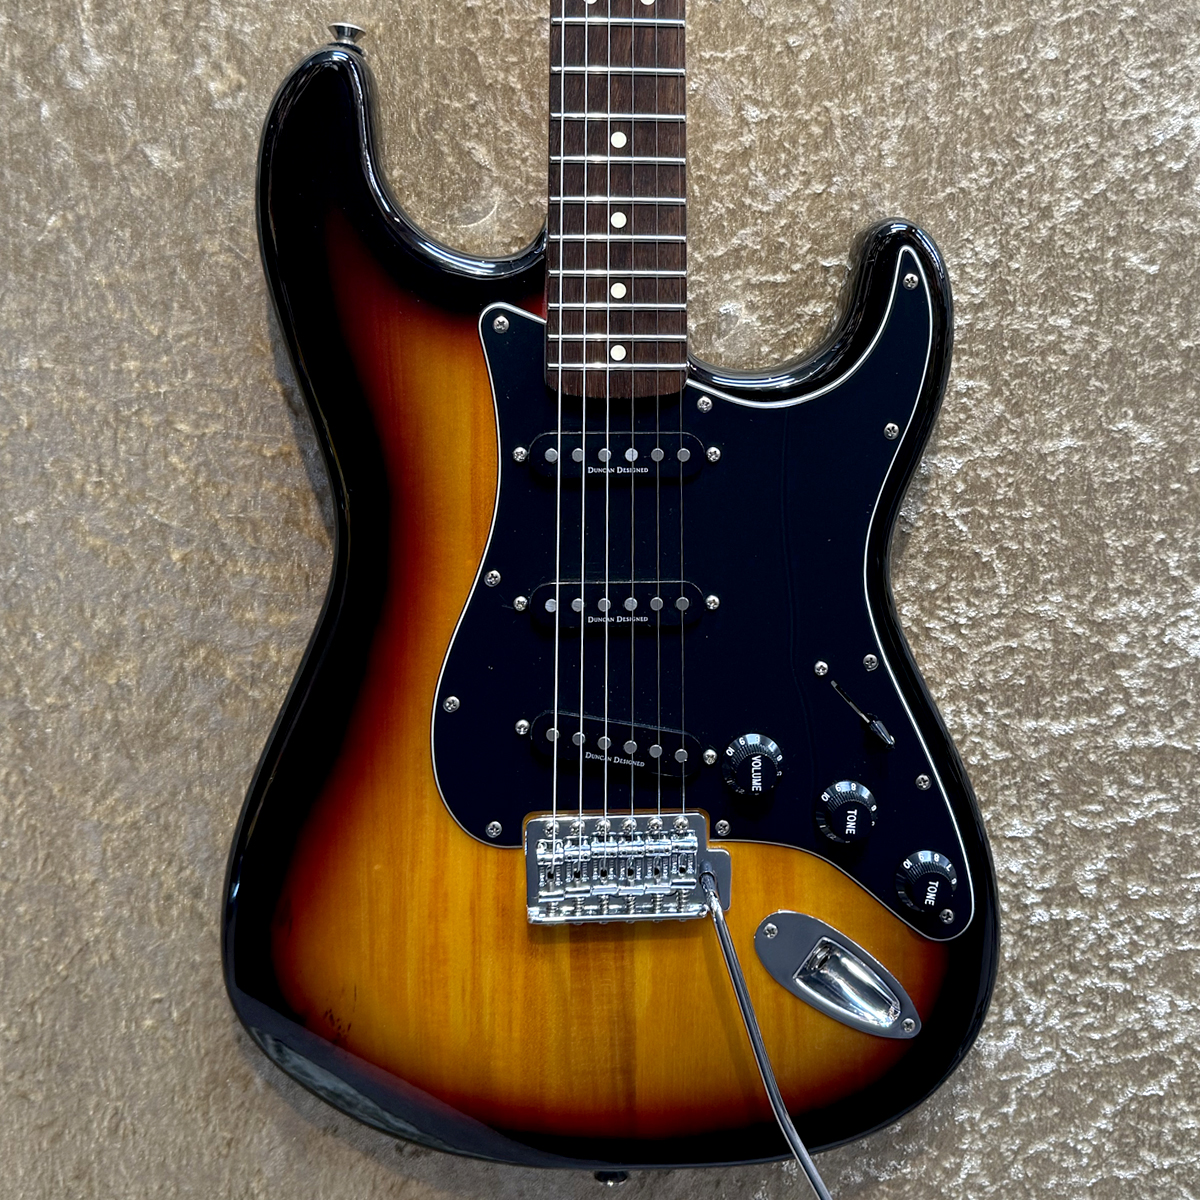 Vintage Modified 70s Stratocaster